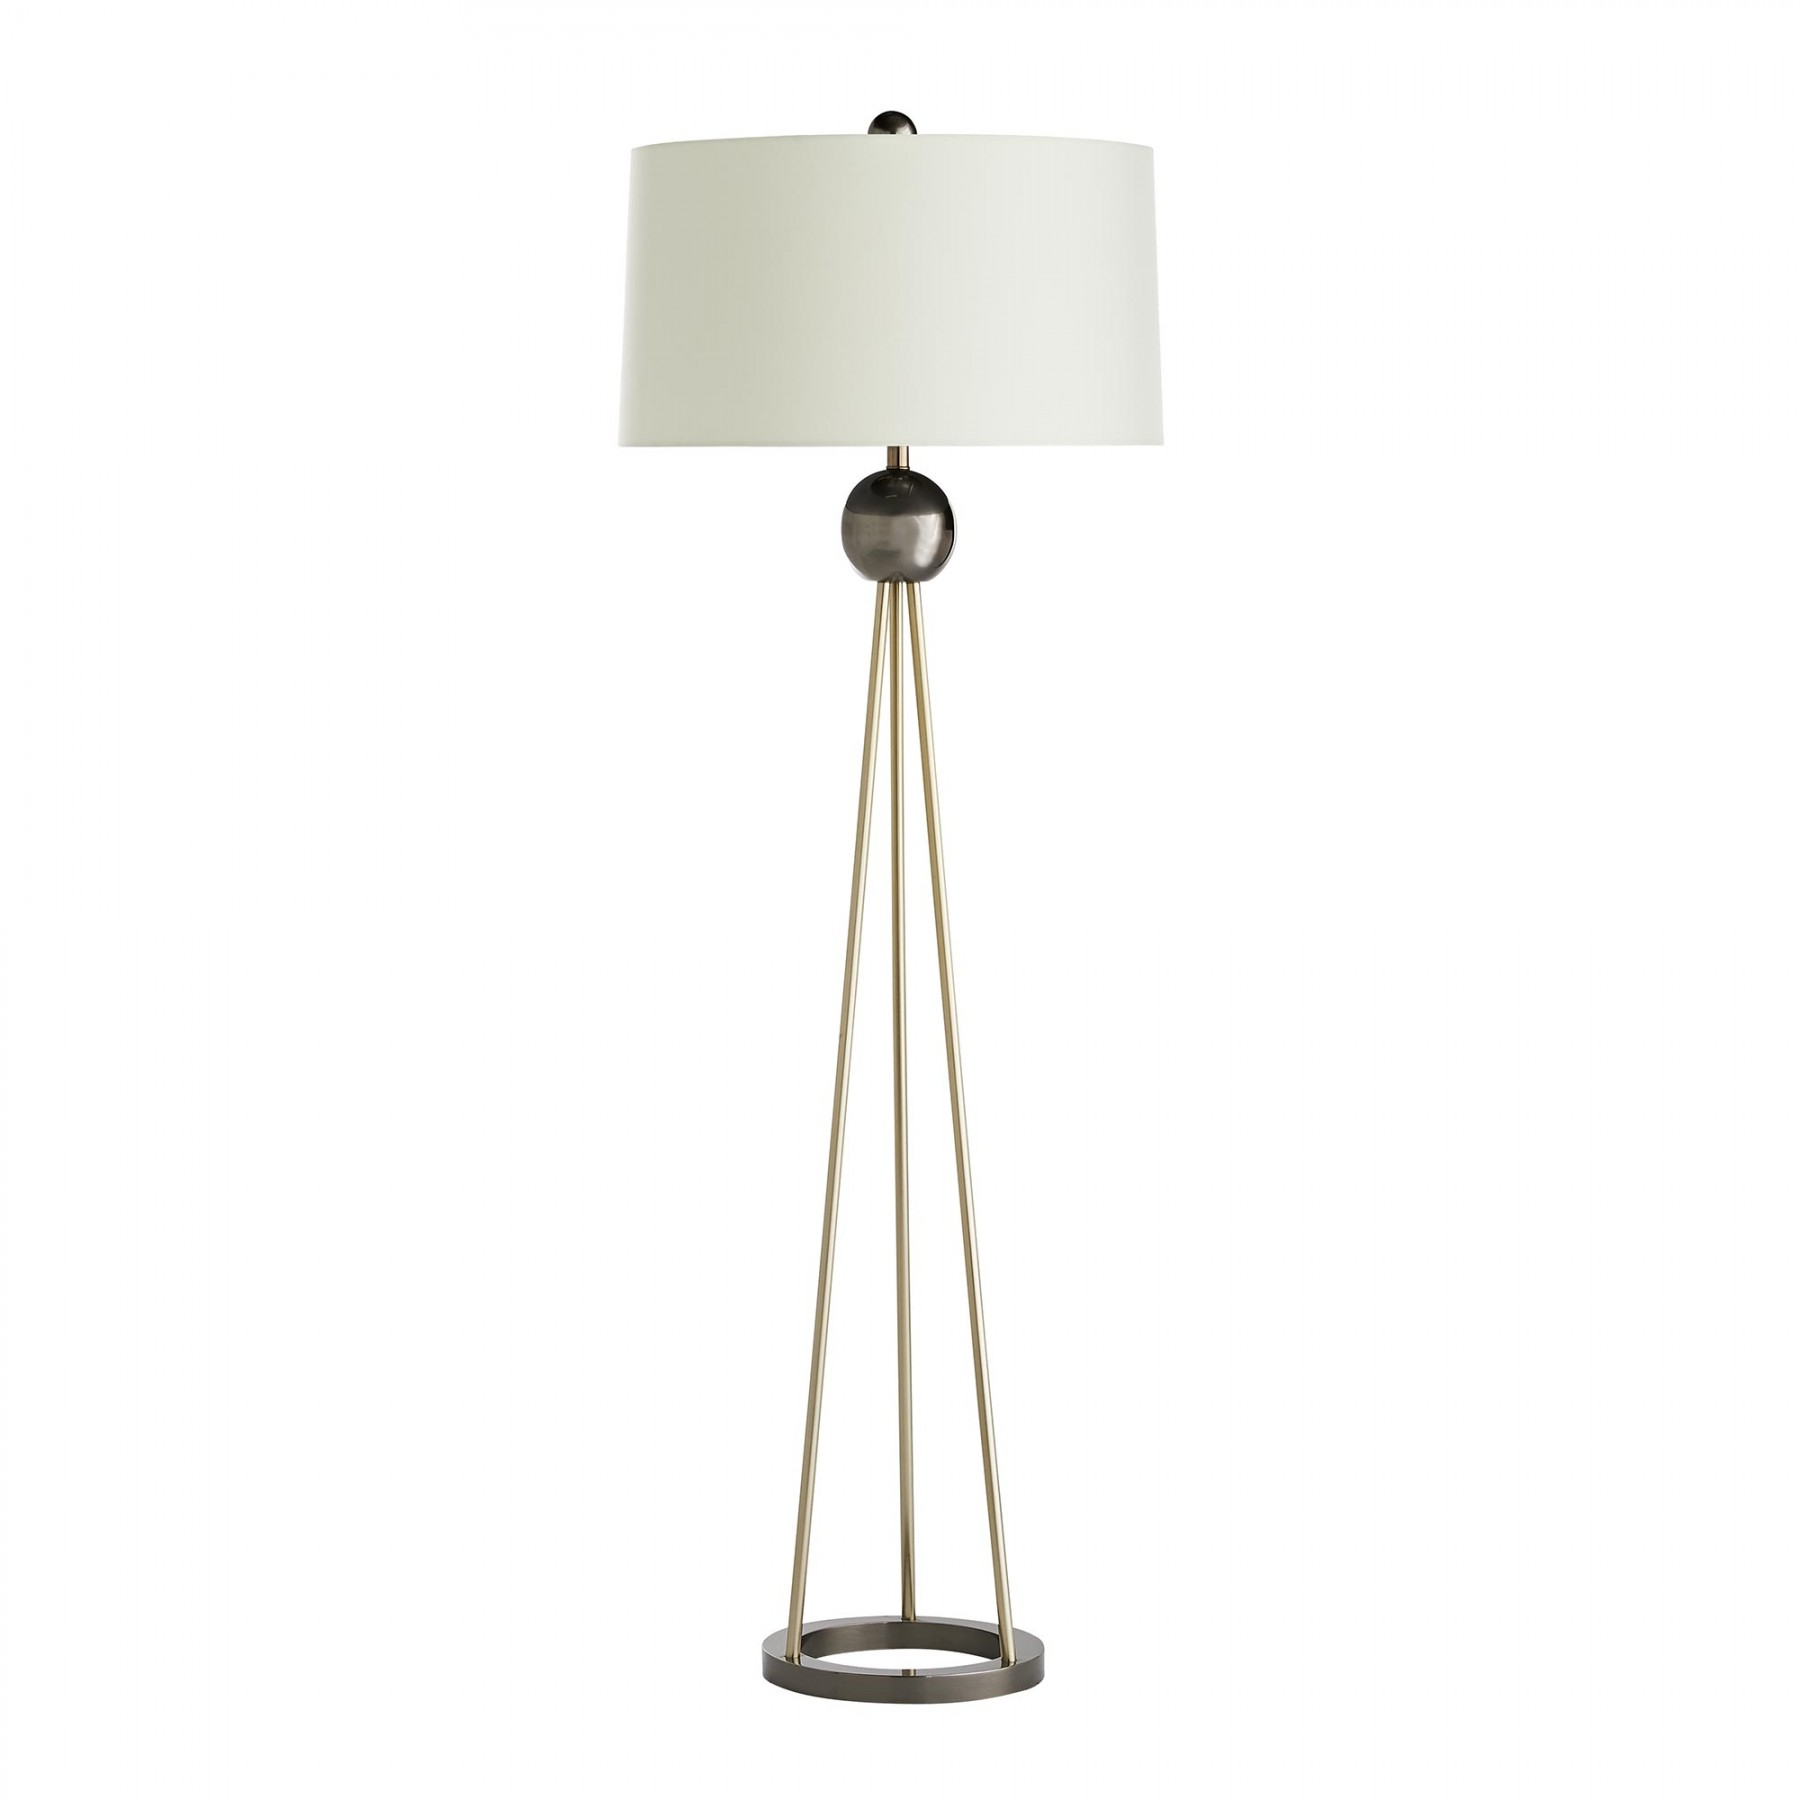 Hadley Floor Lamp intended for sizing 1800 X 1800